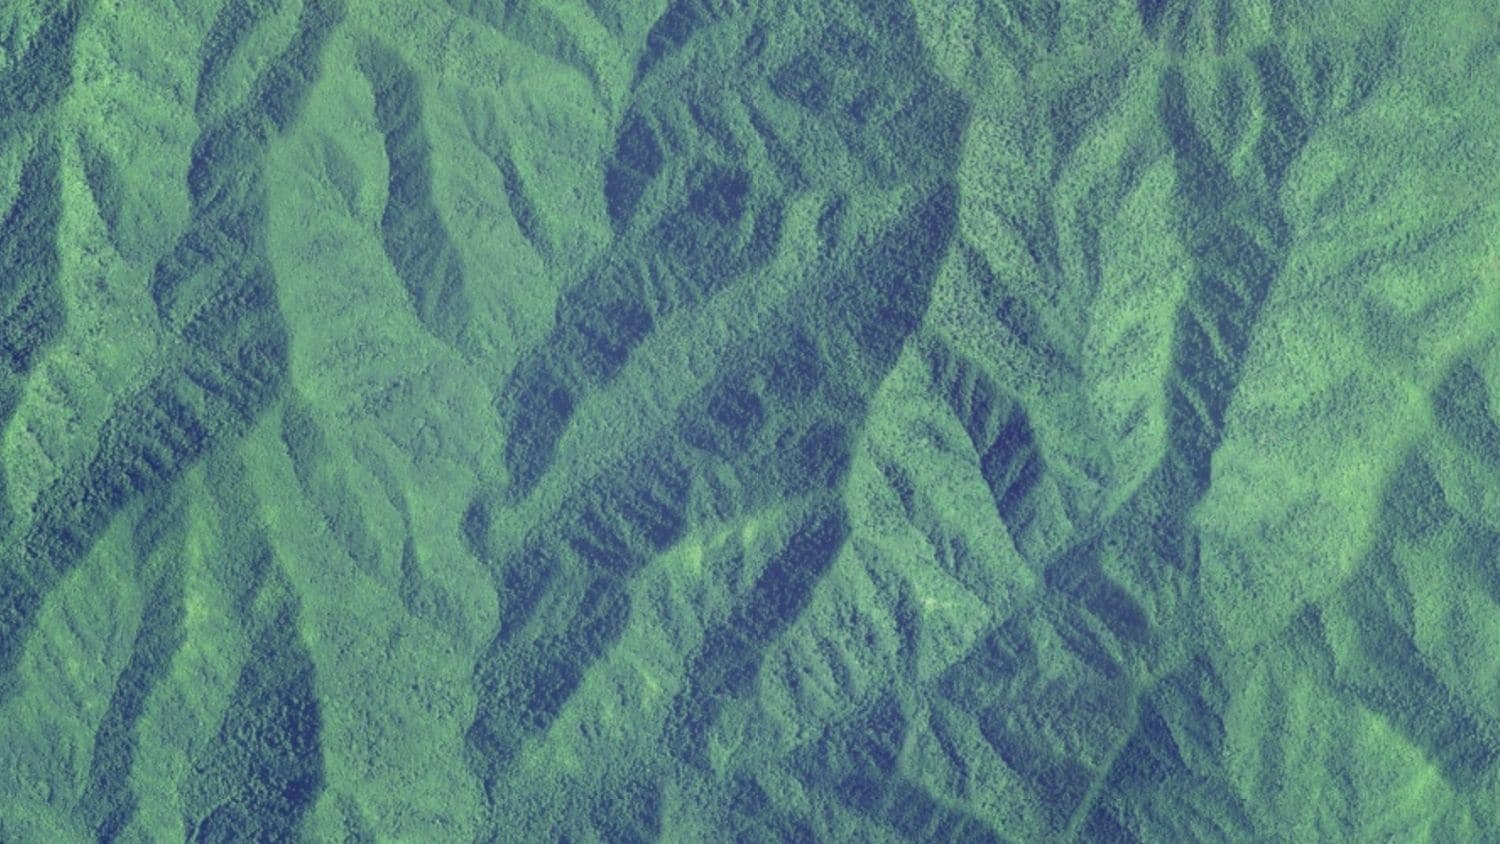 The image shows the peaks and valleys of mountain forests